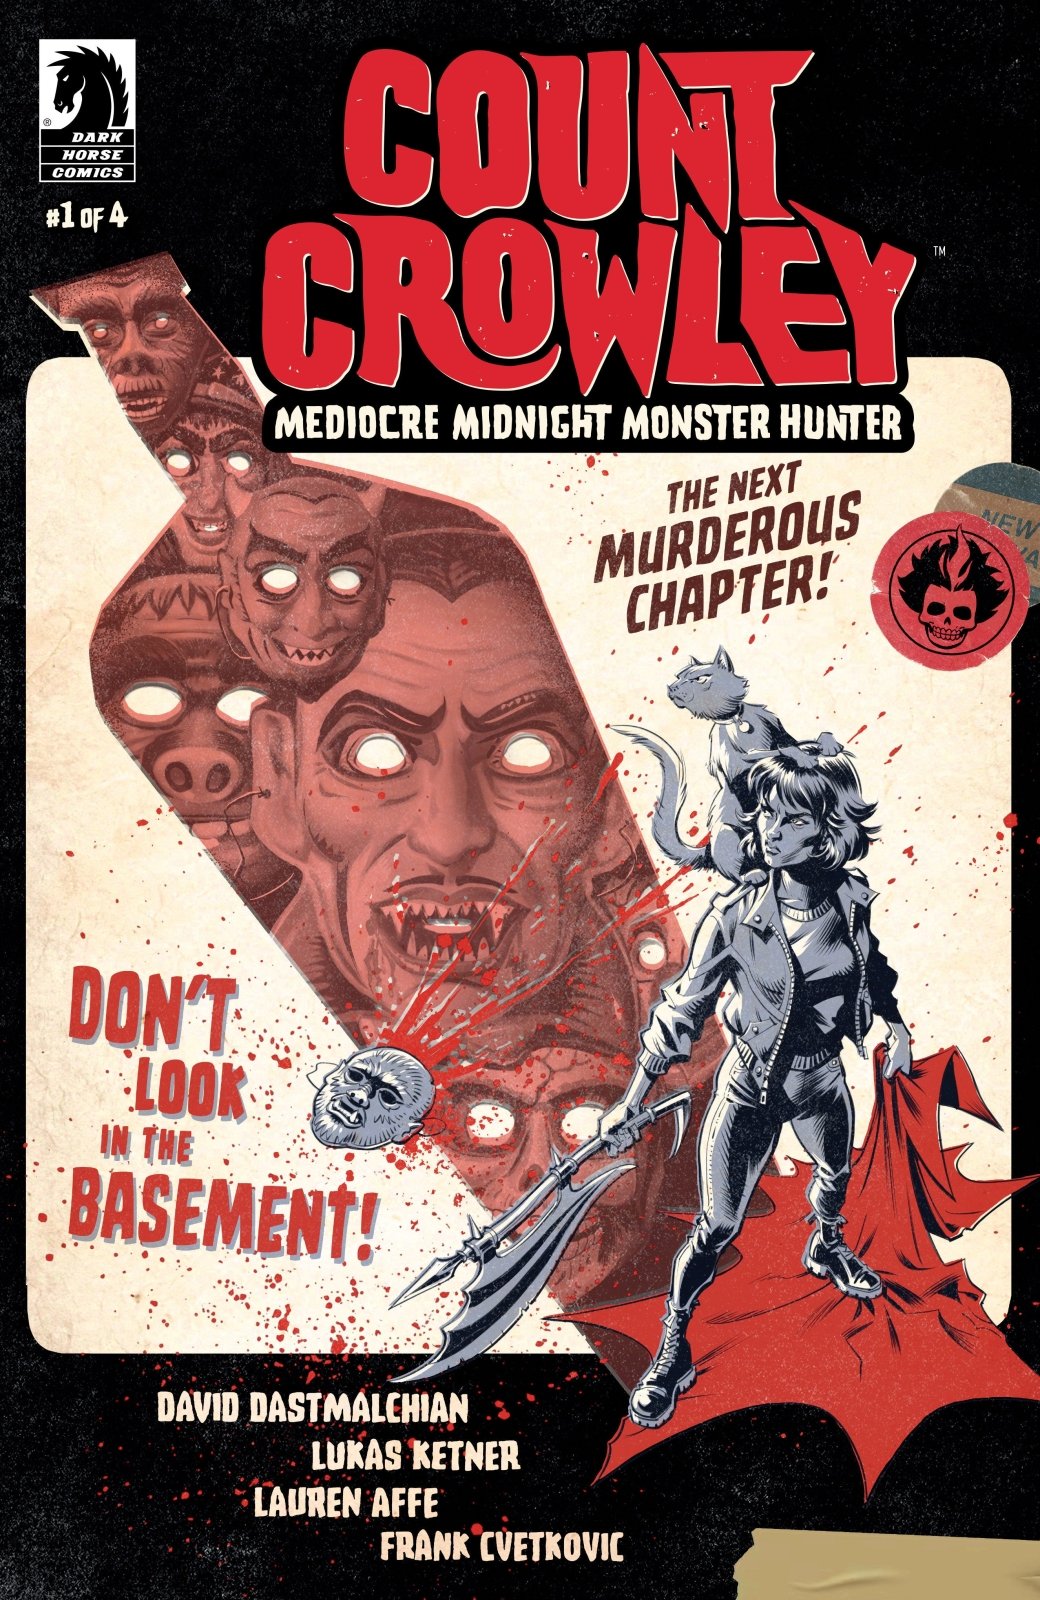 Count Crowley: Mediocre Midnight Monster Hunter #1 (Cover A) (Lukas Ketner) - The Fourth Place